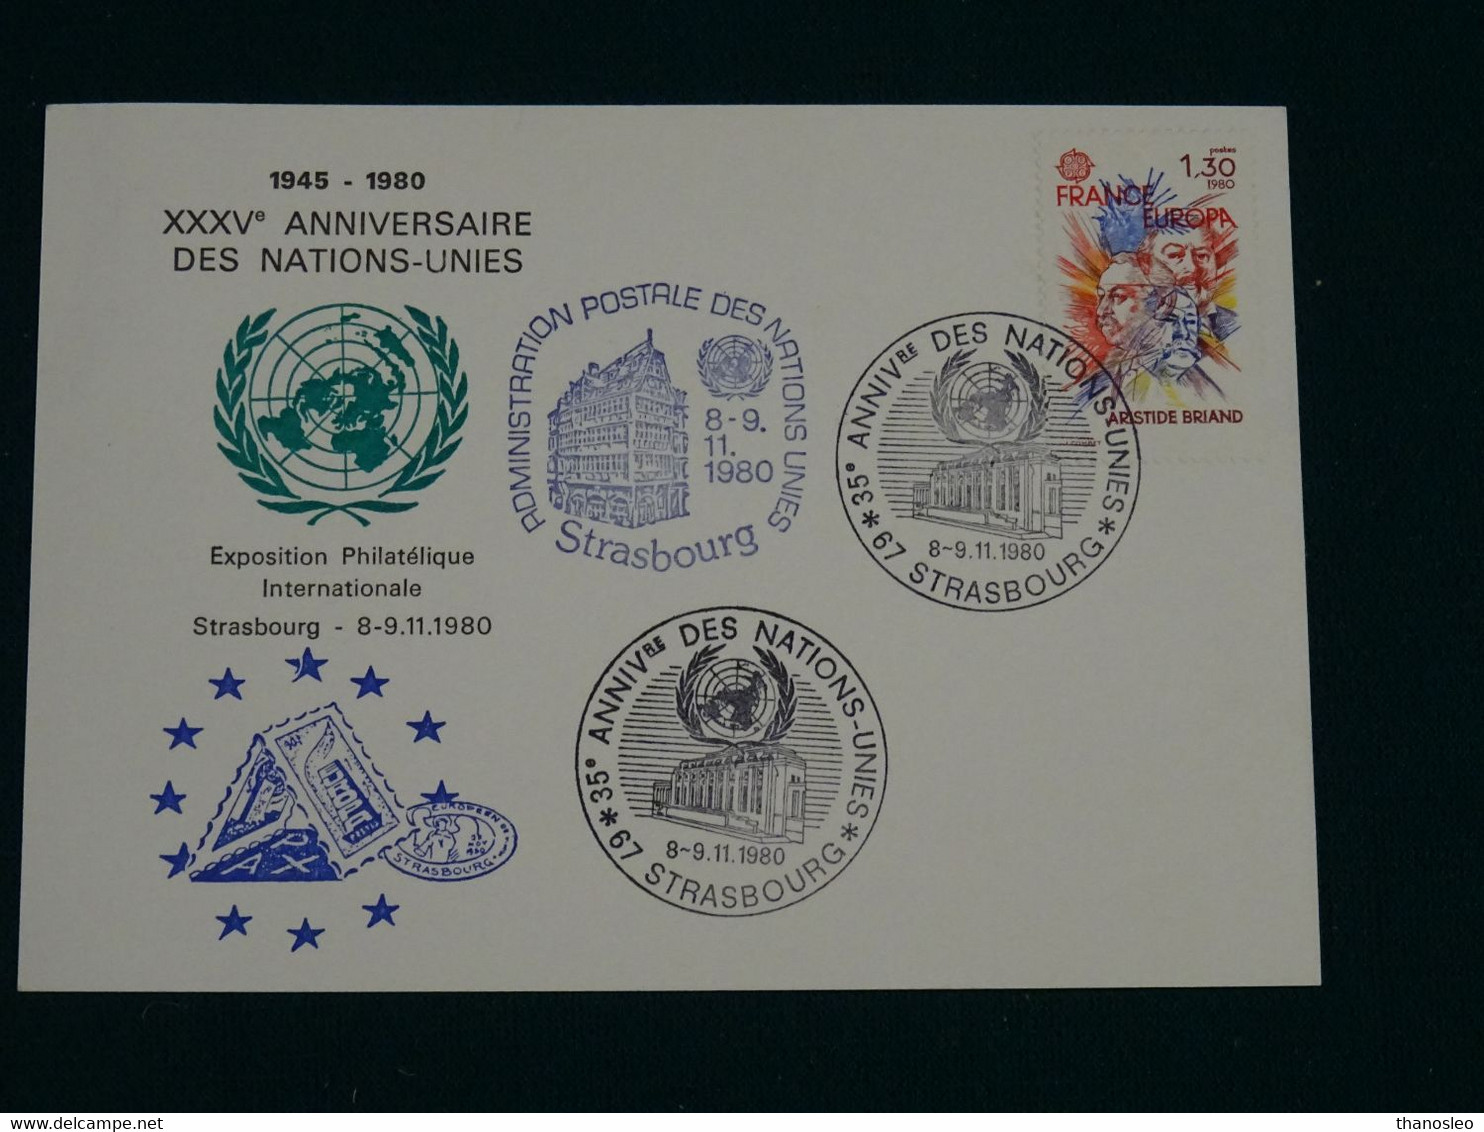 United Nations 1980 Card Strasbourg VF - Covers & Documents